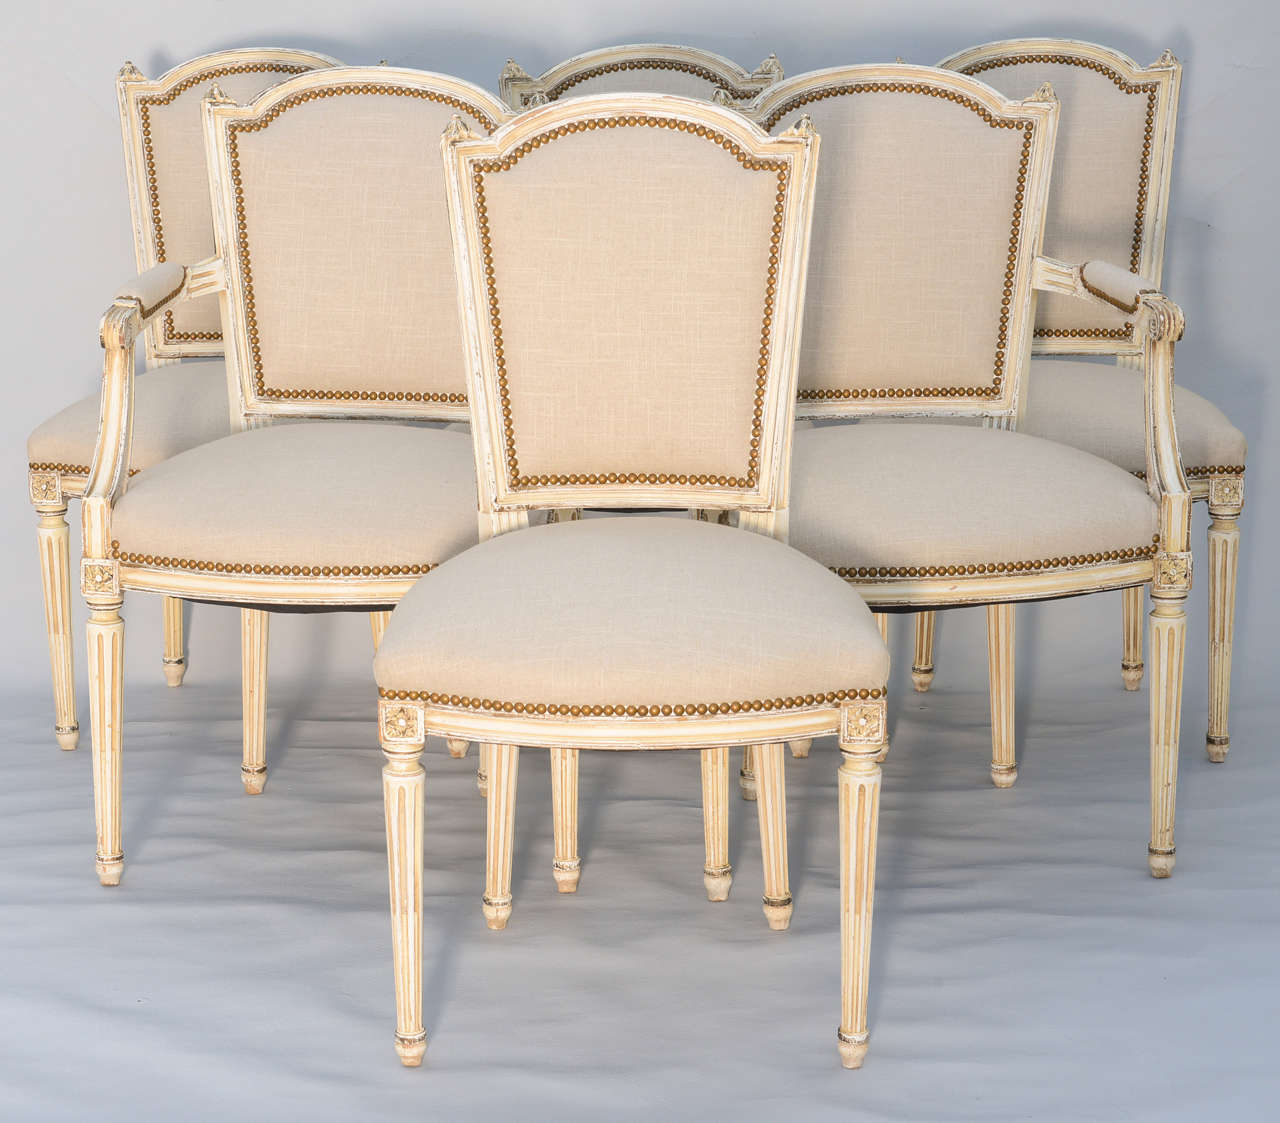 Set of 6 dining room chairs (two armchairs and four side chairs), distressed painted finish, each having domed padded backrest and crown seat upholstered in linen with nailheads; raised on round fluted legs. (Side chairs are 20